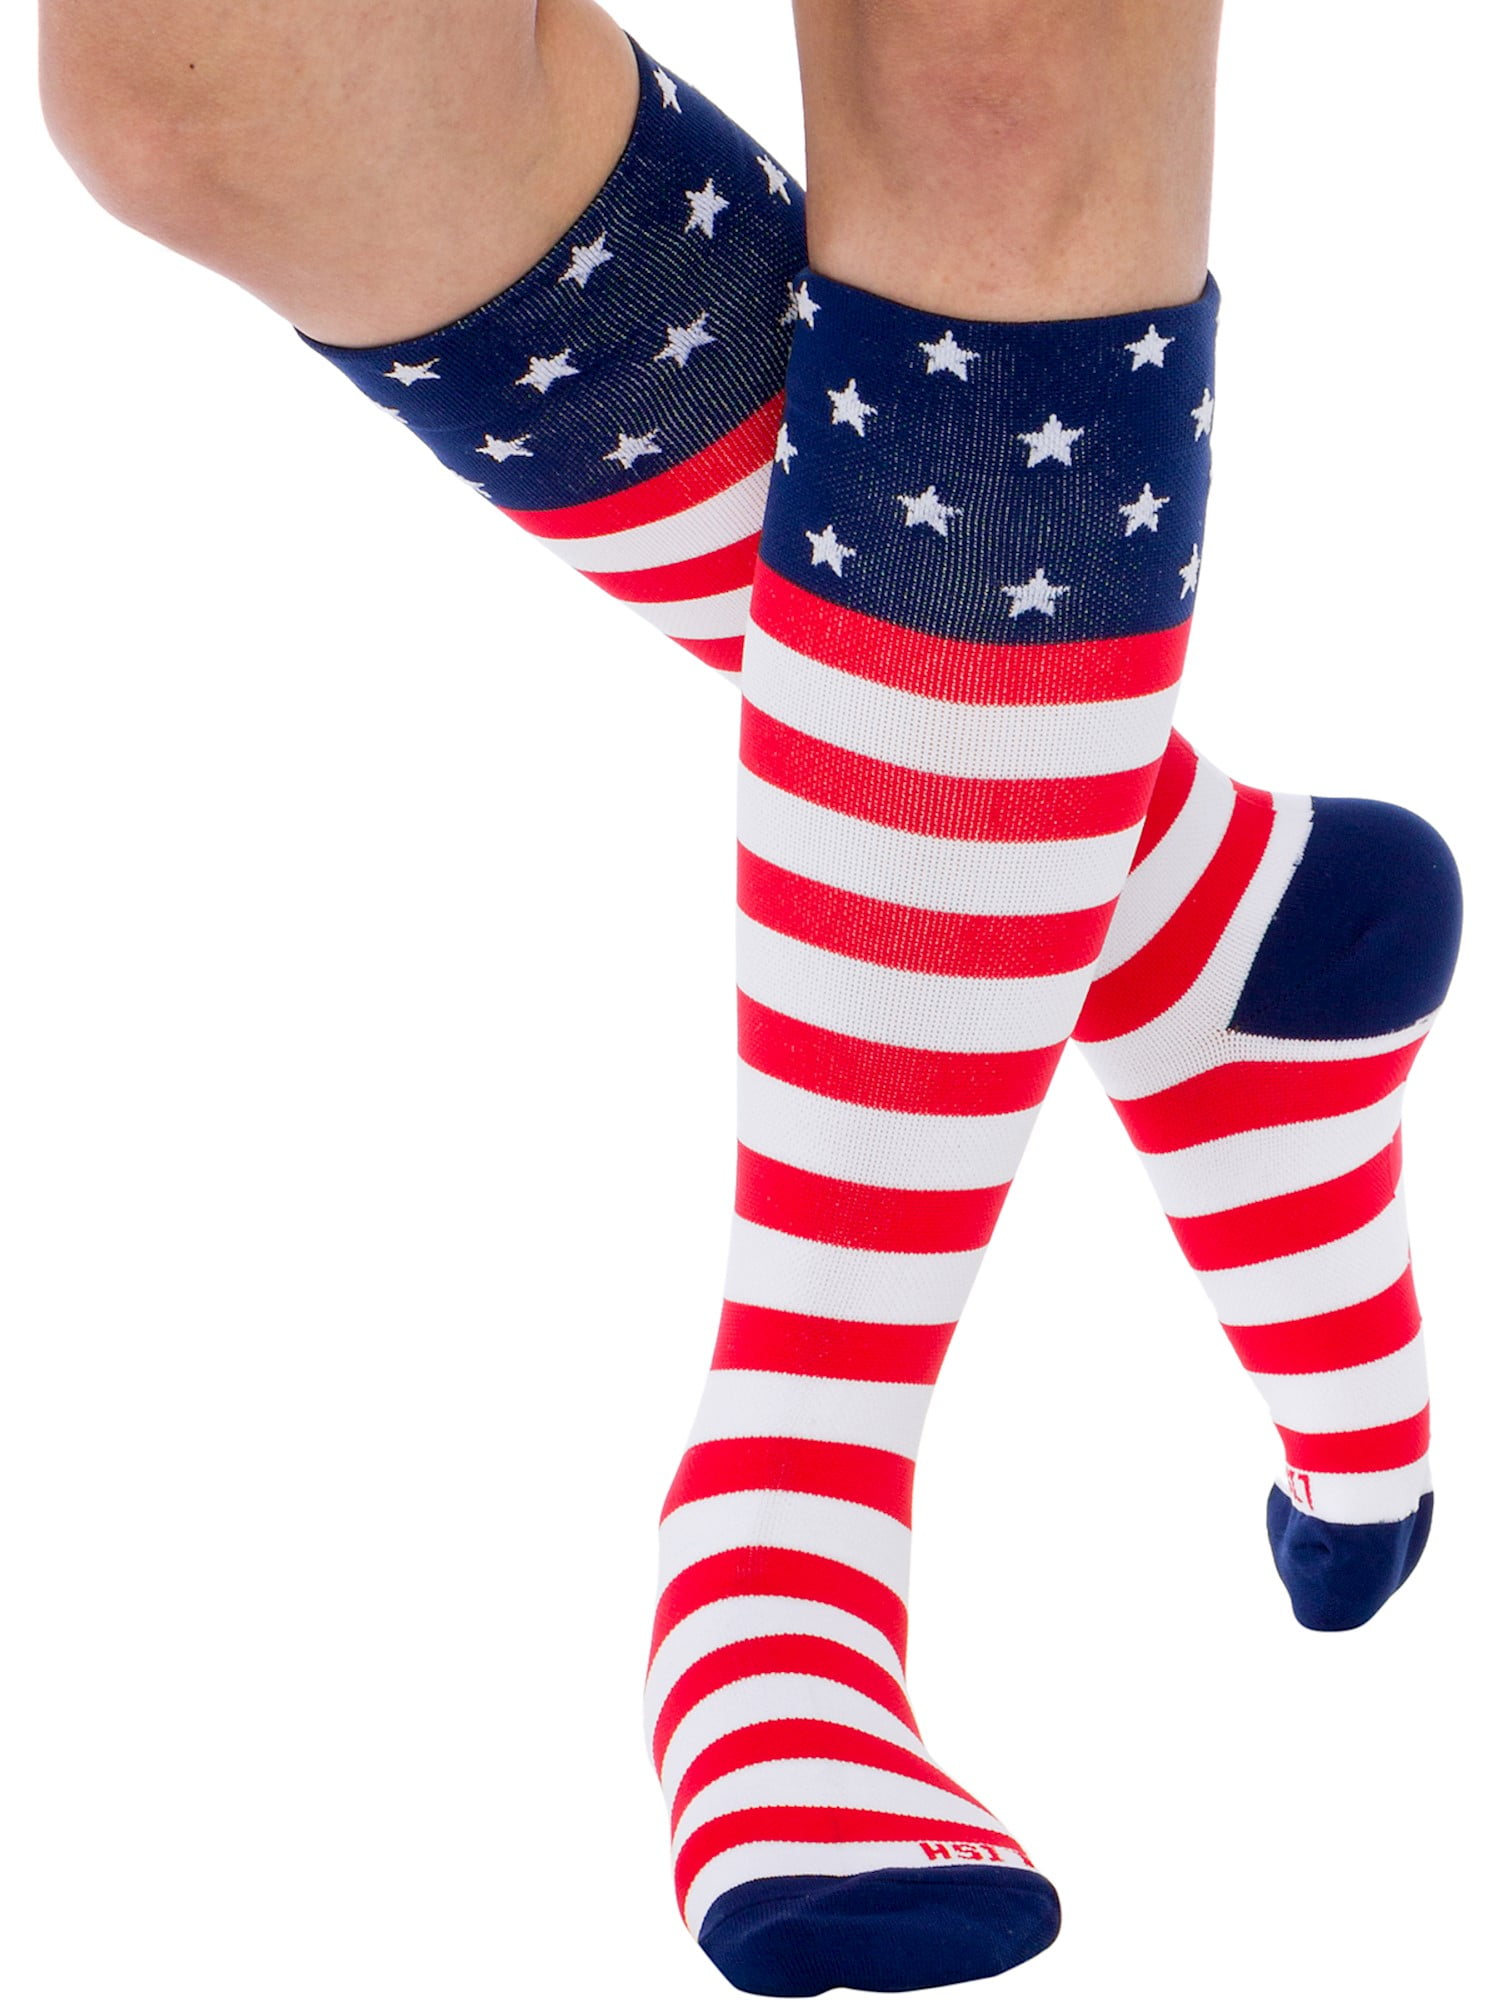 American Philippines Flag Over The Knee High Boot Stockings Cotton Thigh High Compression Socks 